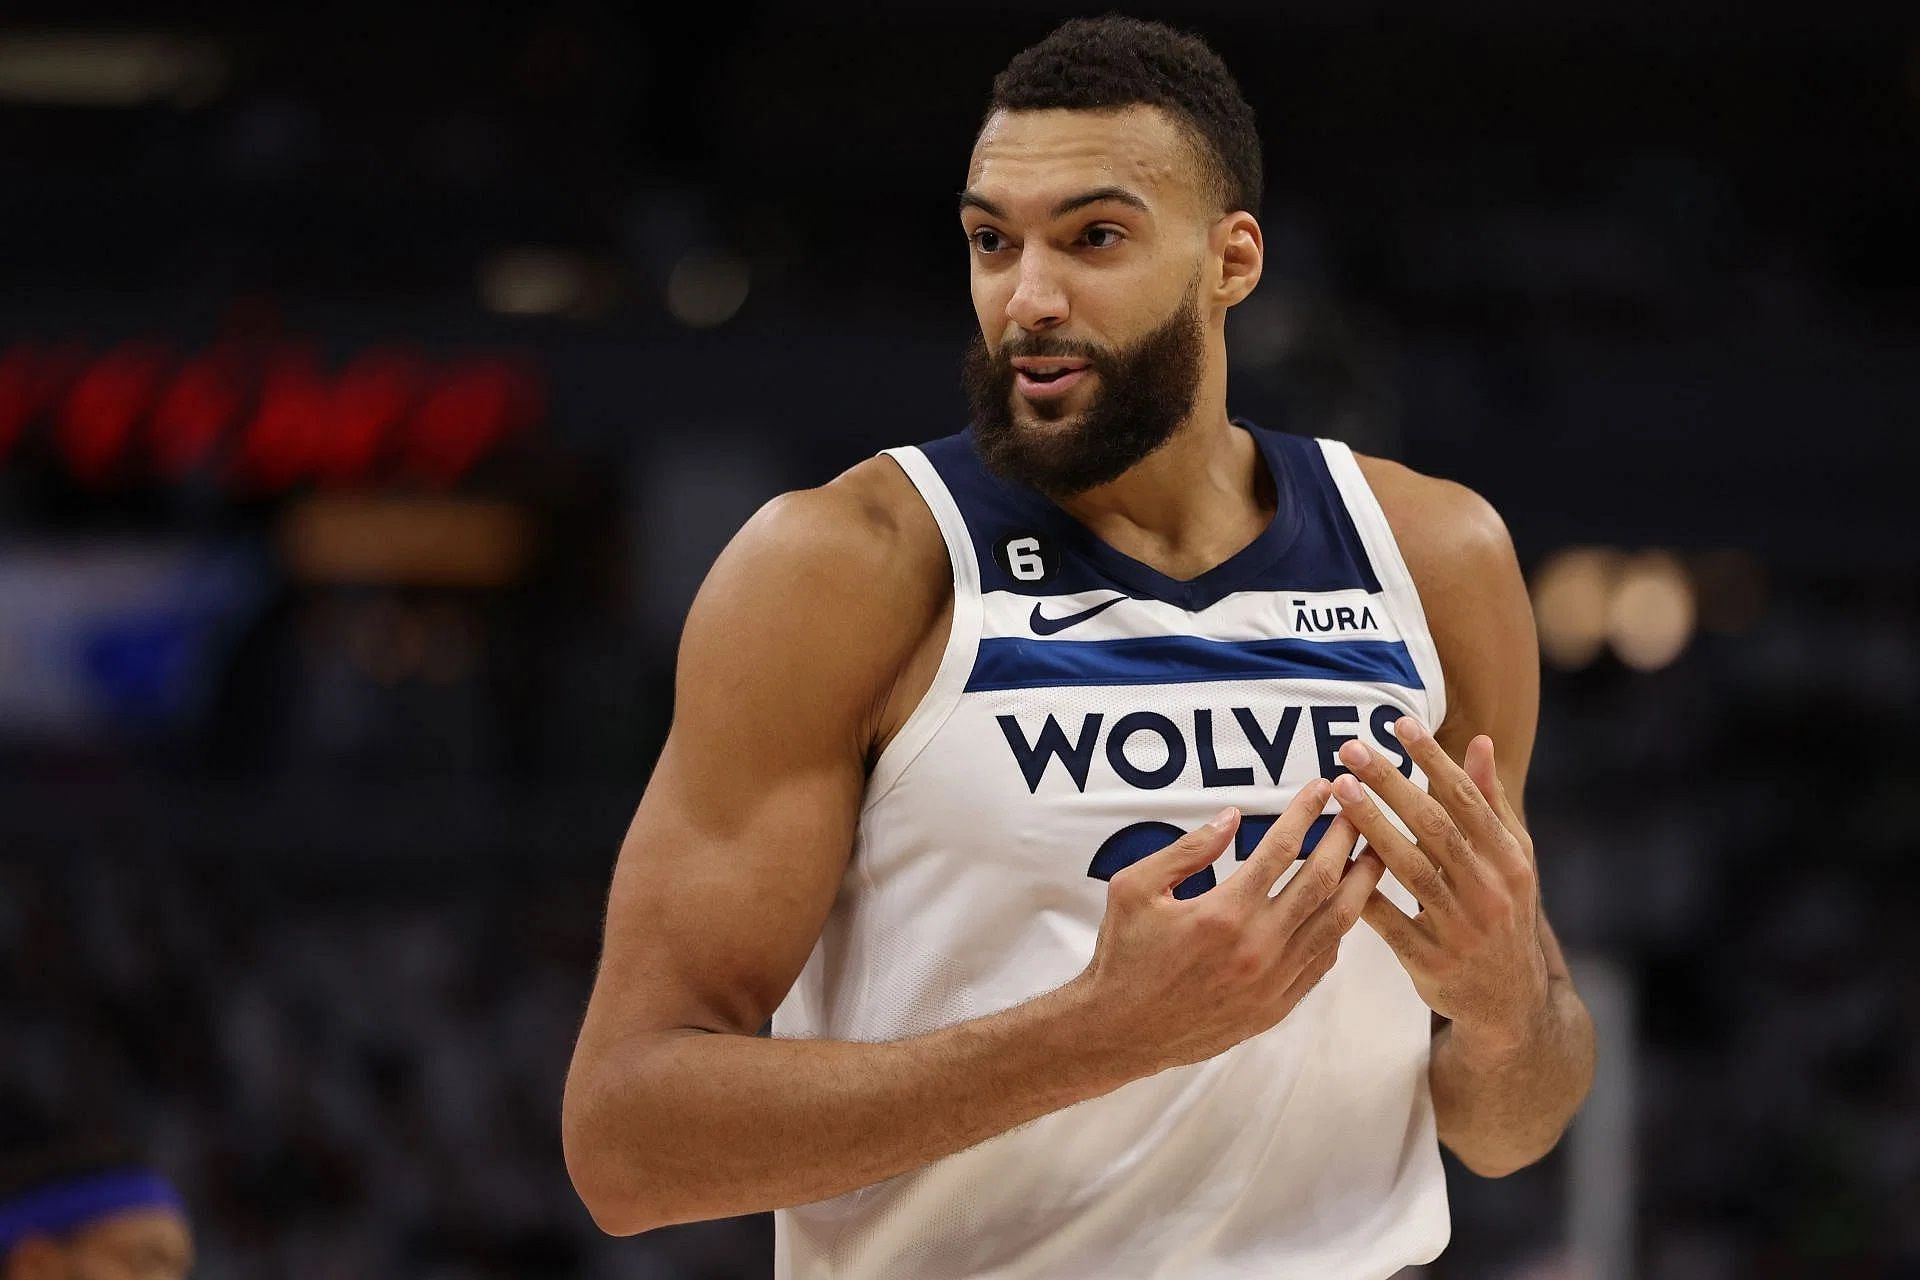 Minnesota Timberwolves big man Rudy Gobert made a surprising corner three attempt in their game against the New Orleans Pelicans on Saturday.